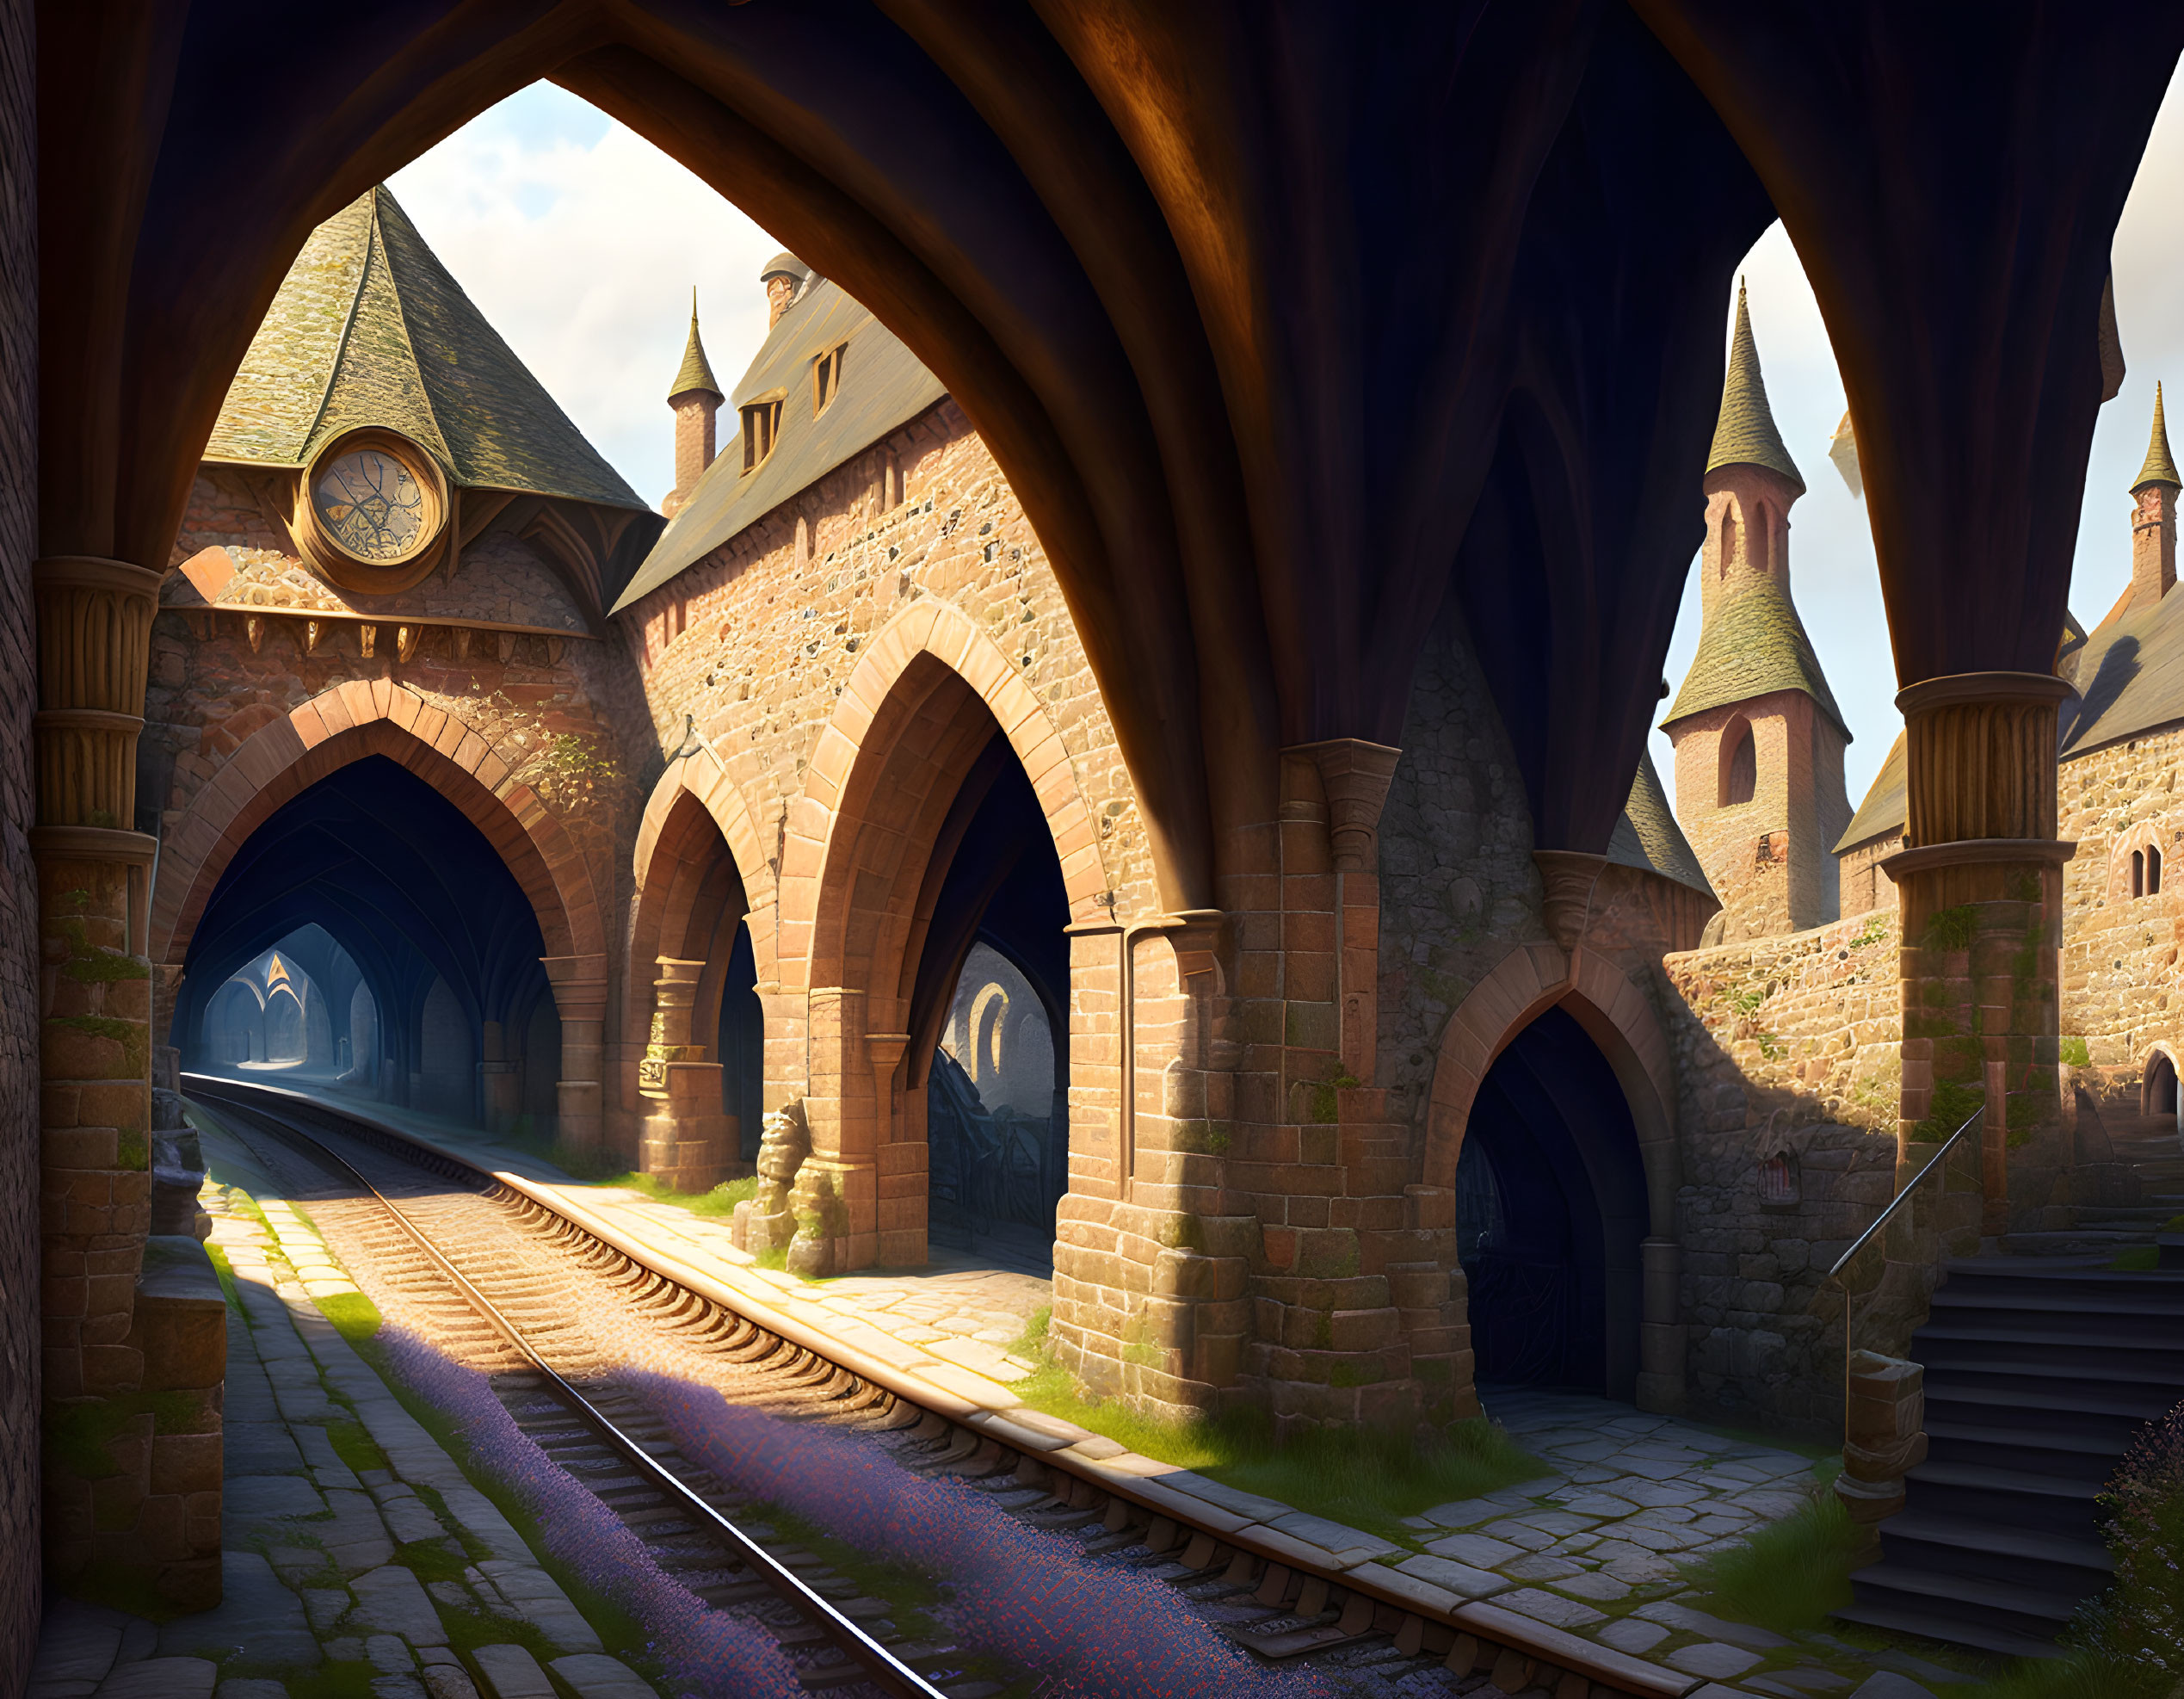 Enchanting train station with arches, turrets, and clock in warm sunlight